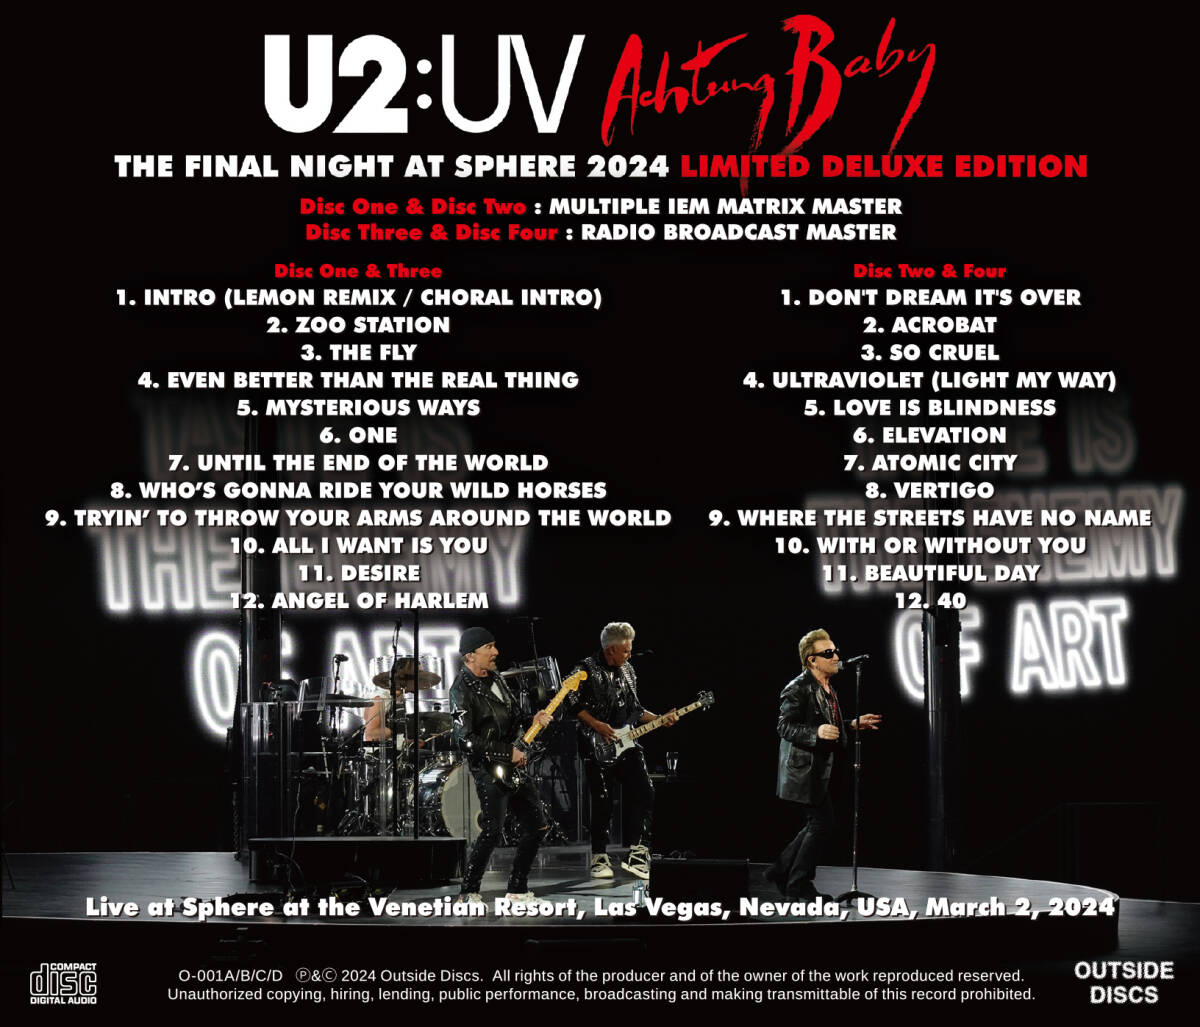 U2 / THE FINAL NIGHT AT SPHERE 2024 : LIMITED DELUXE (4CD) 限定100セット！の画像4